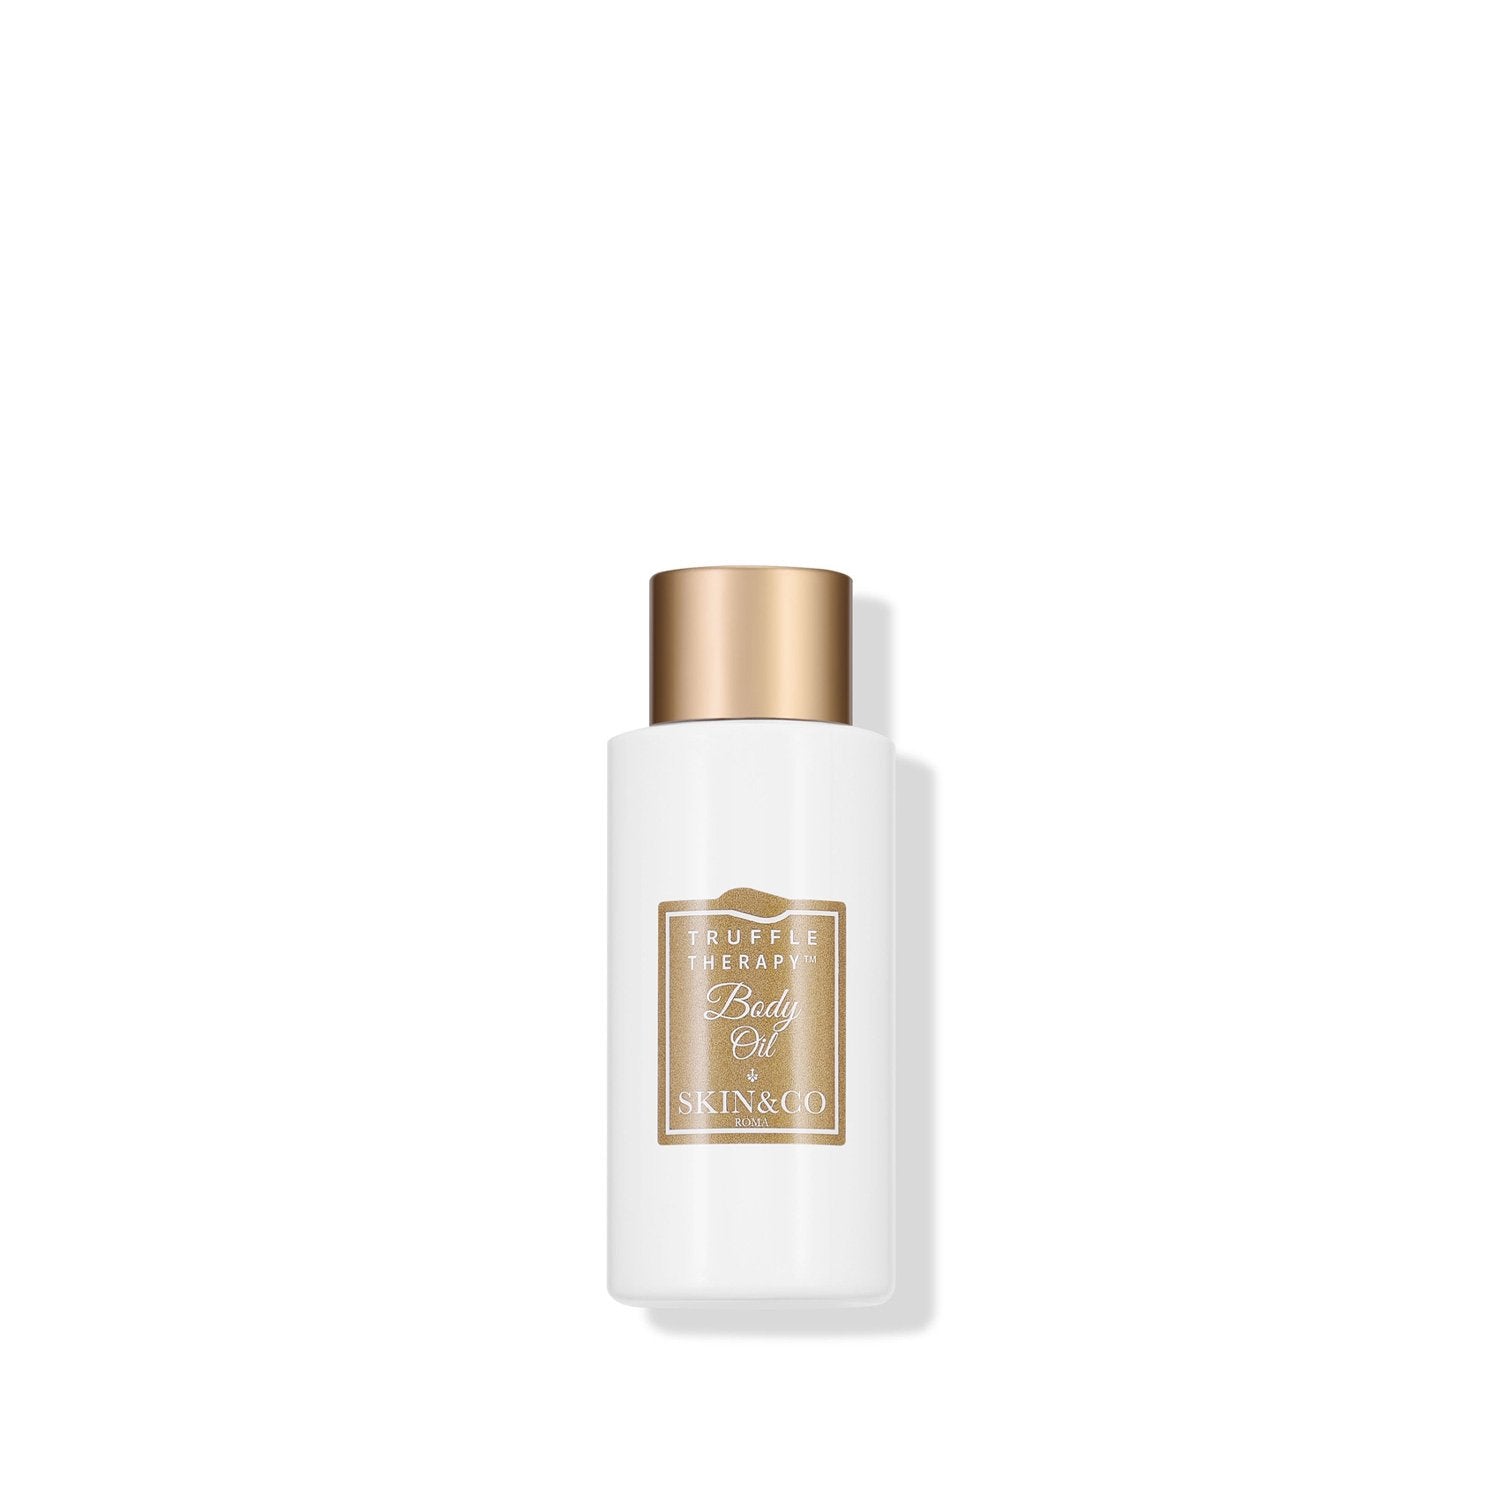 Truffle Therapy Body Oil Travel Deluxe